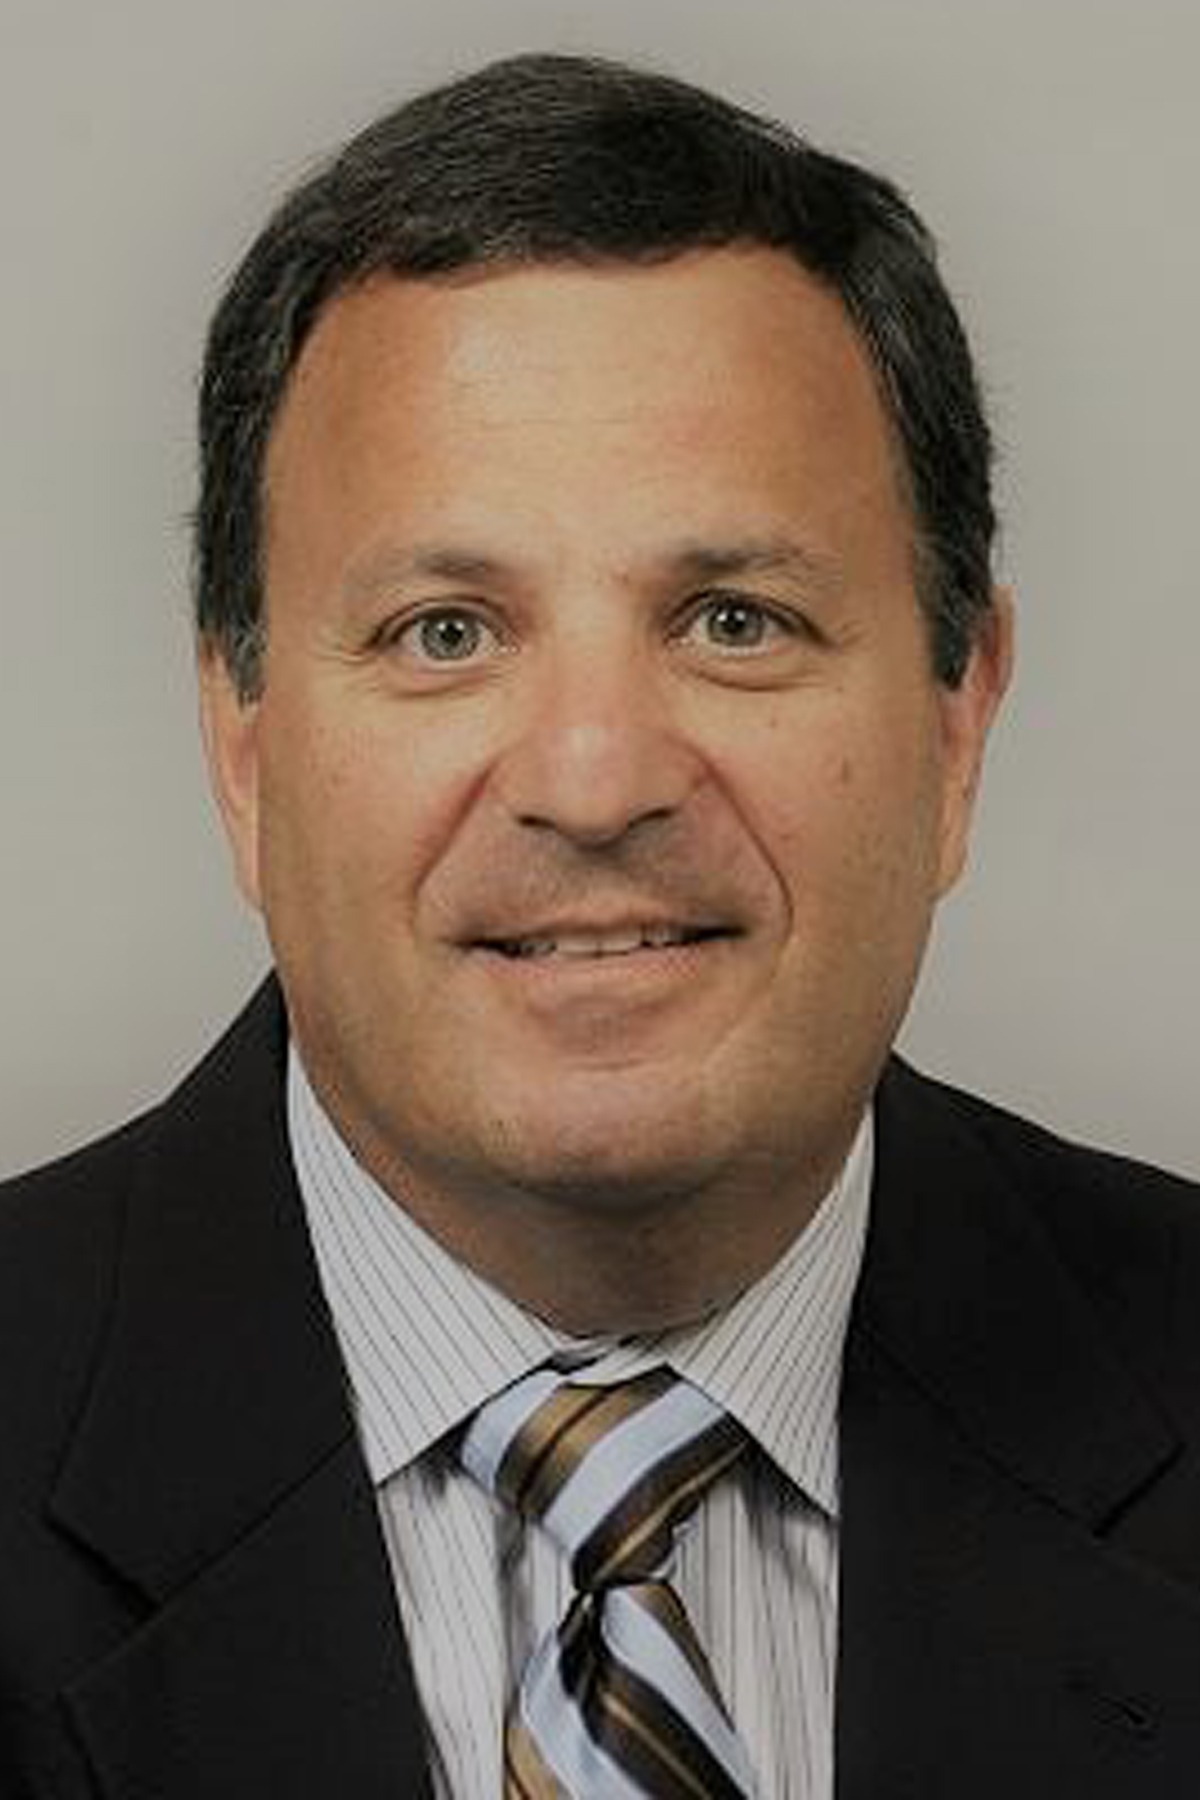 Michael Lombardi - Former General Manager and 3X Super Bowl Winning Executive